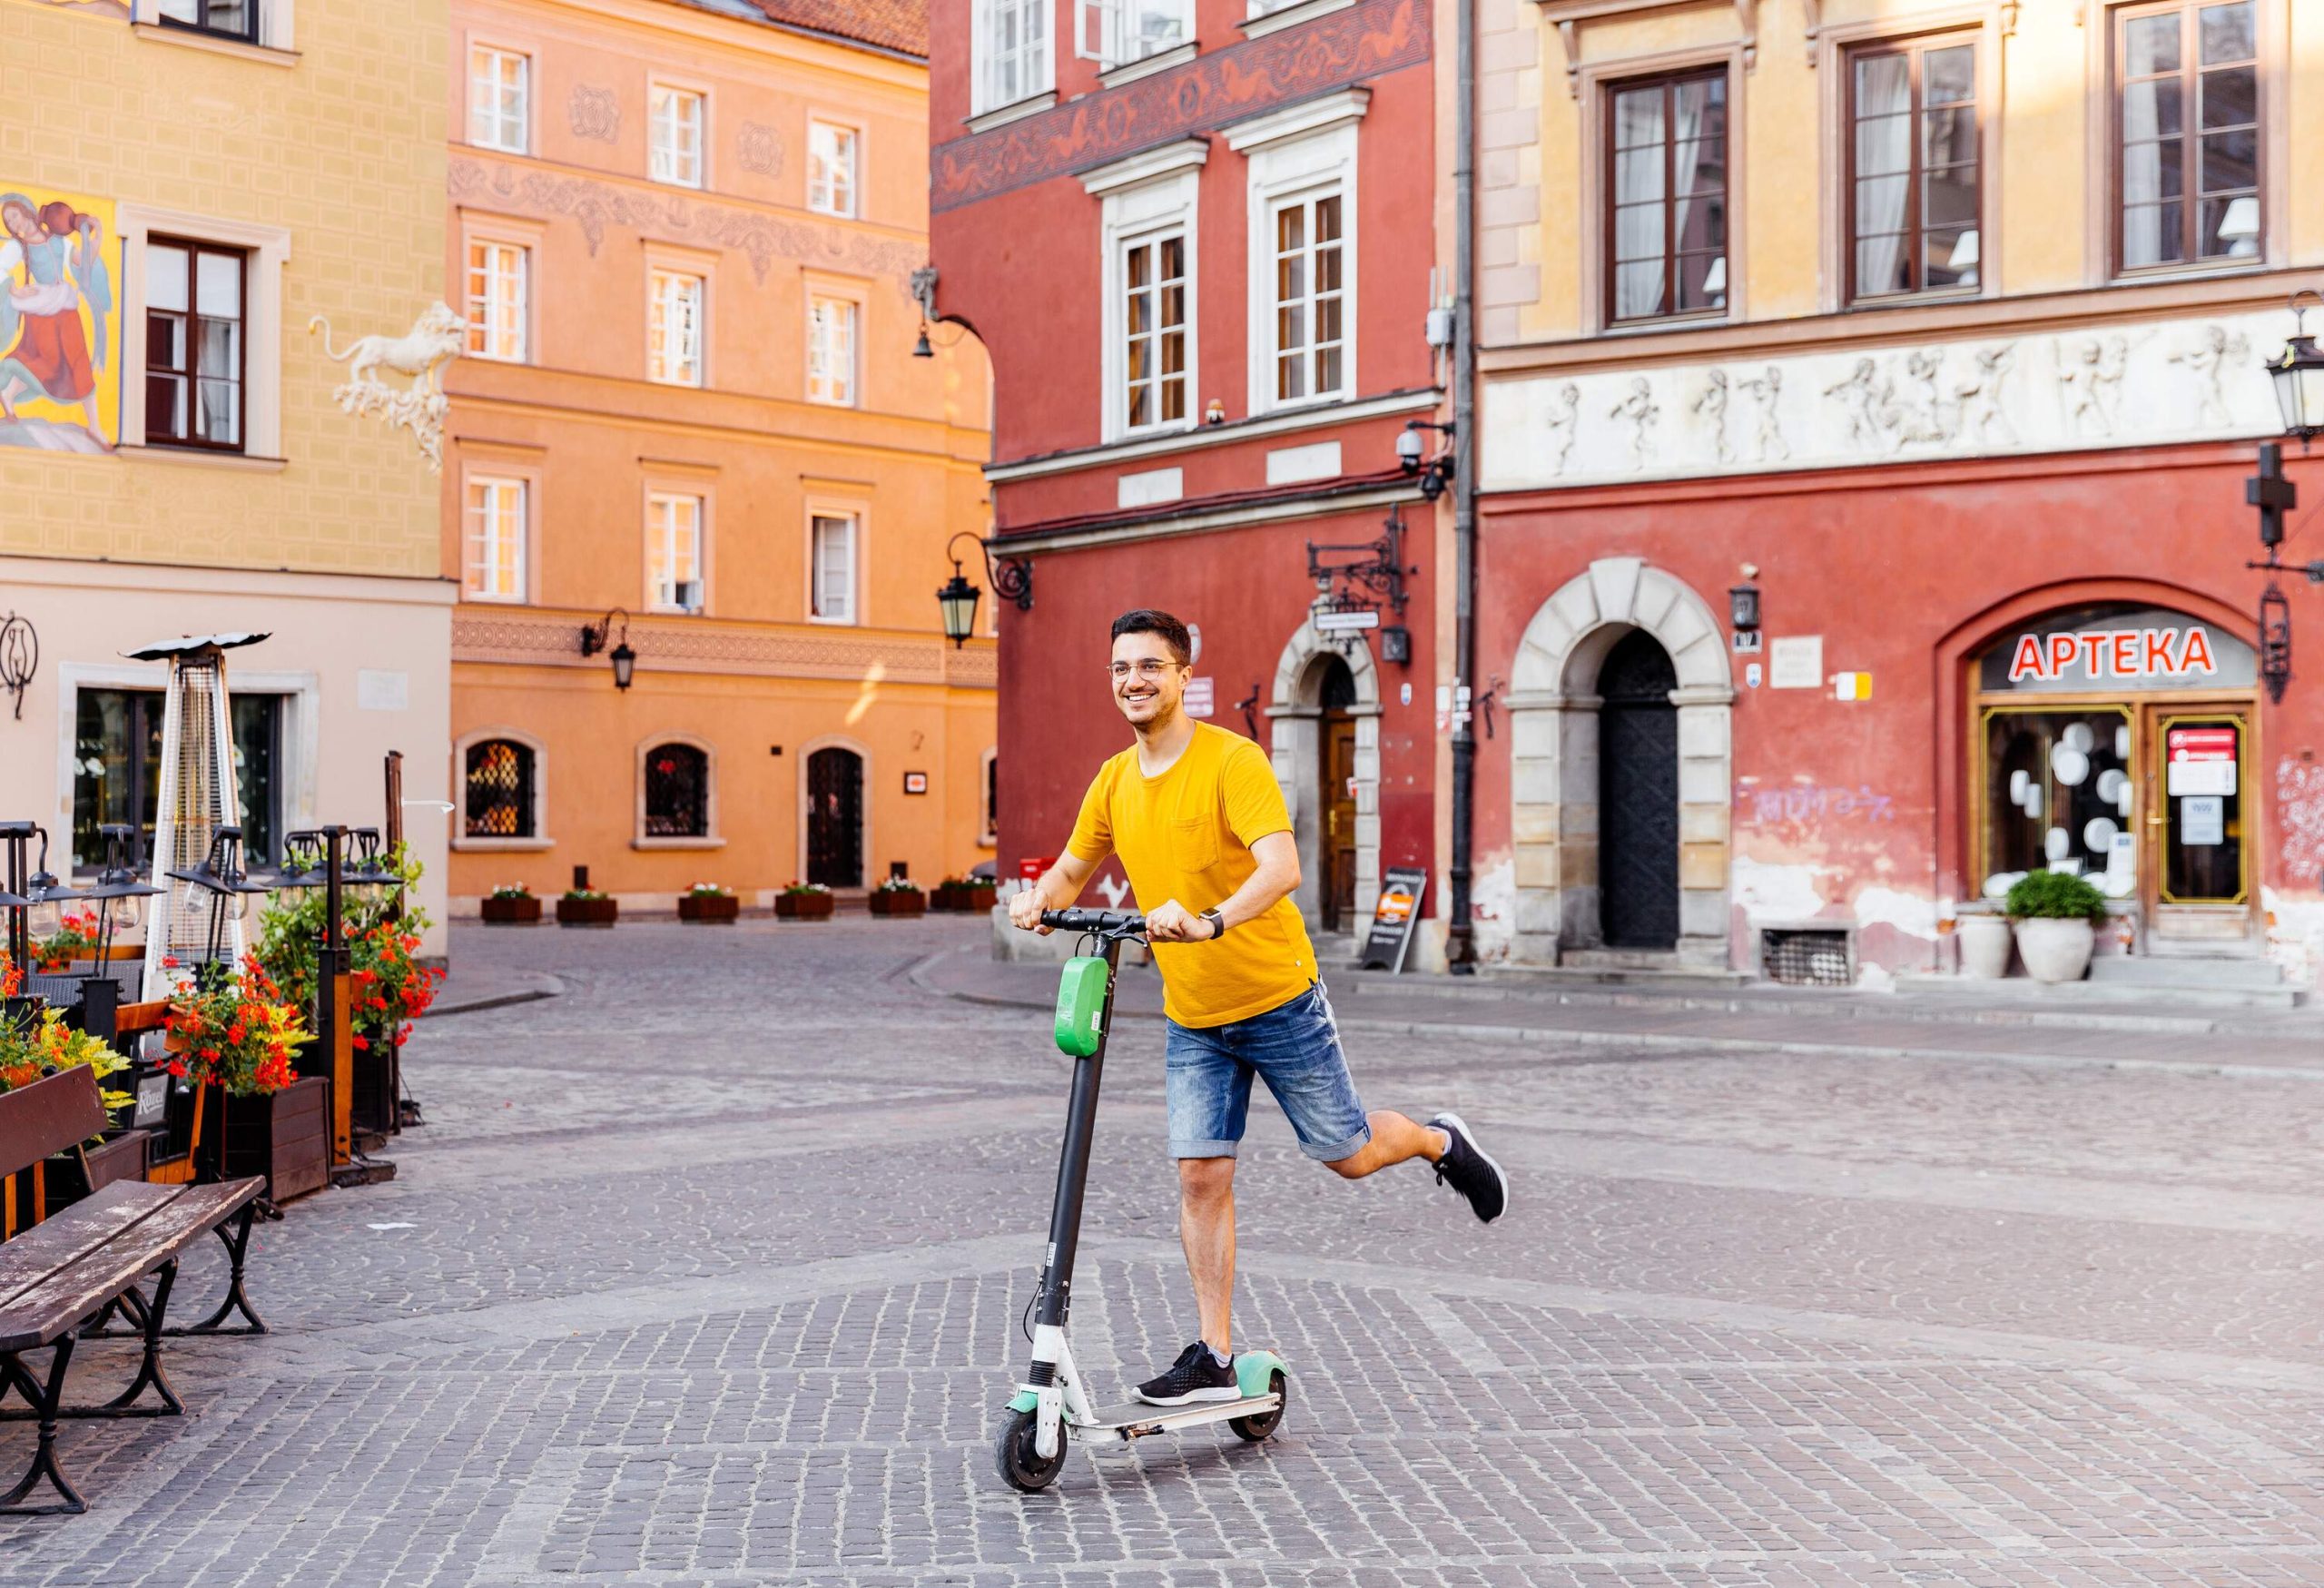 A man rides a scooter in a cobbled square along colourful buildings.